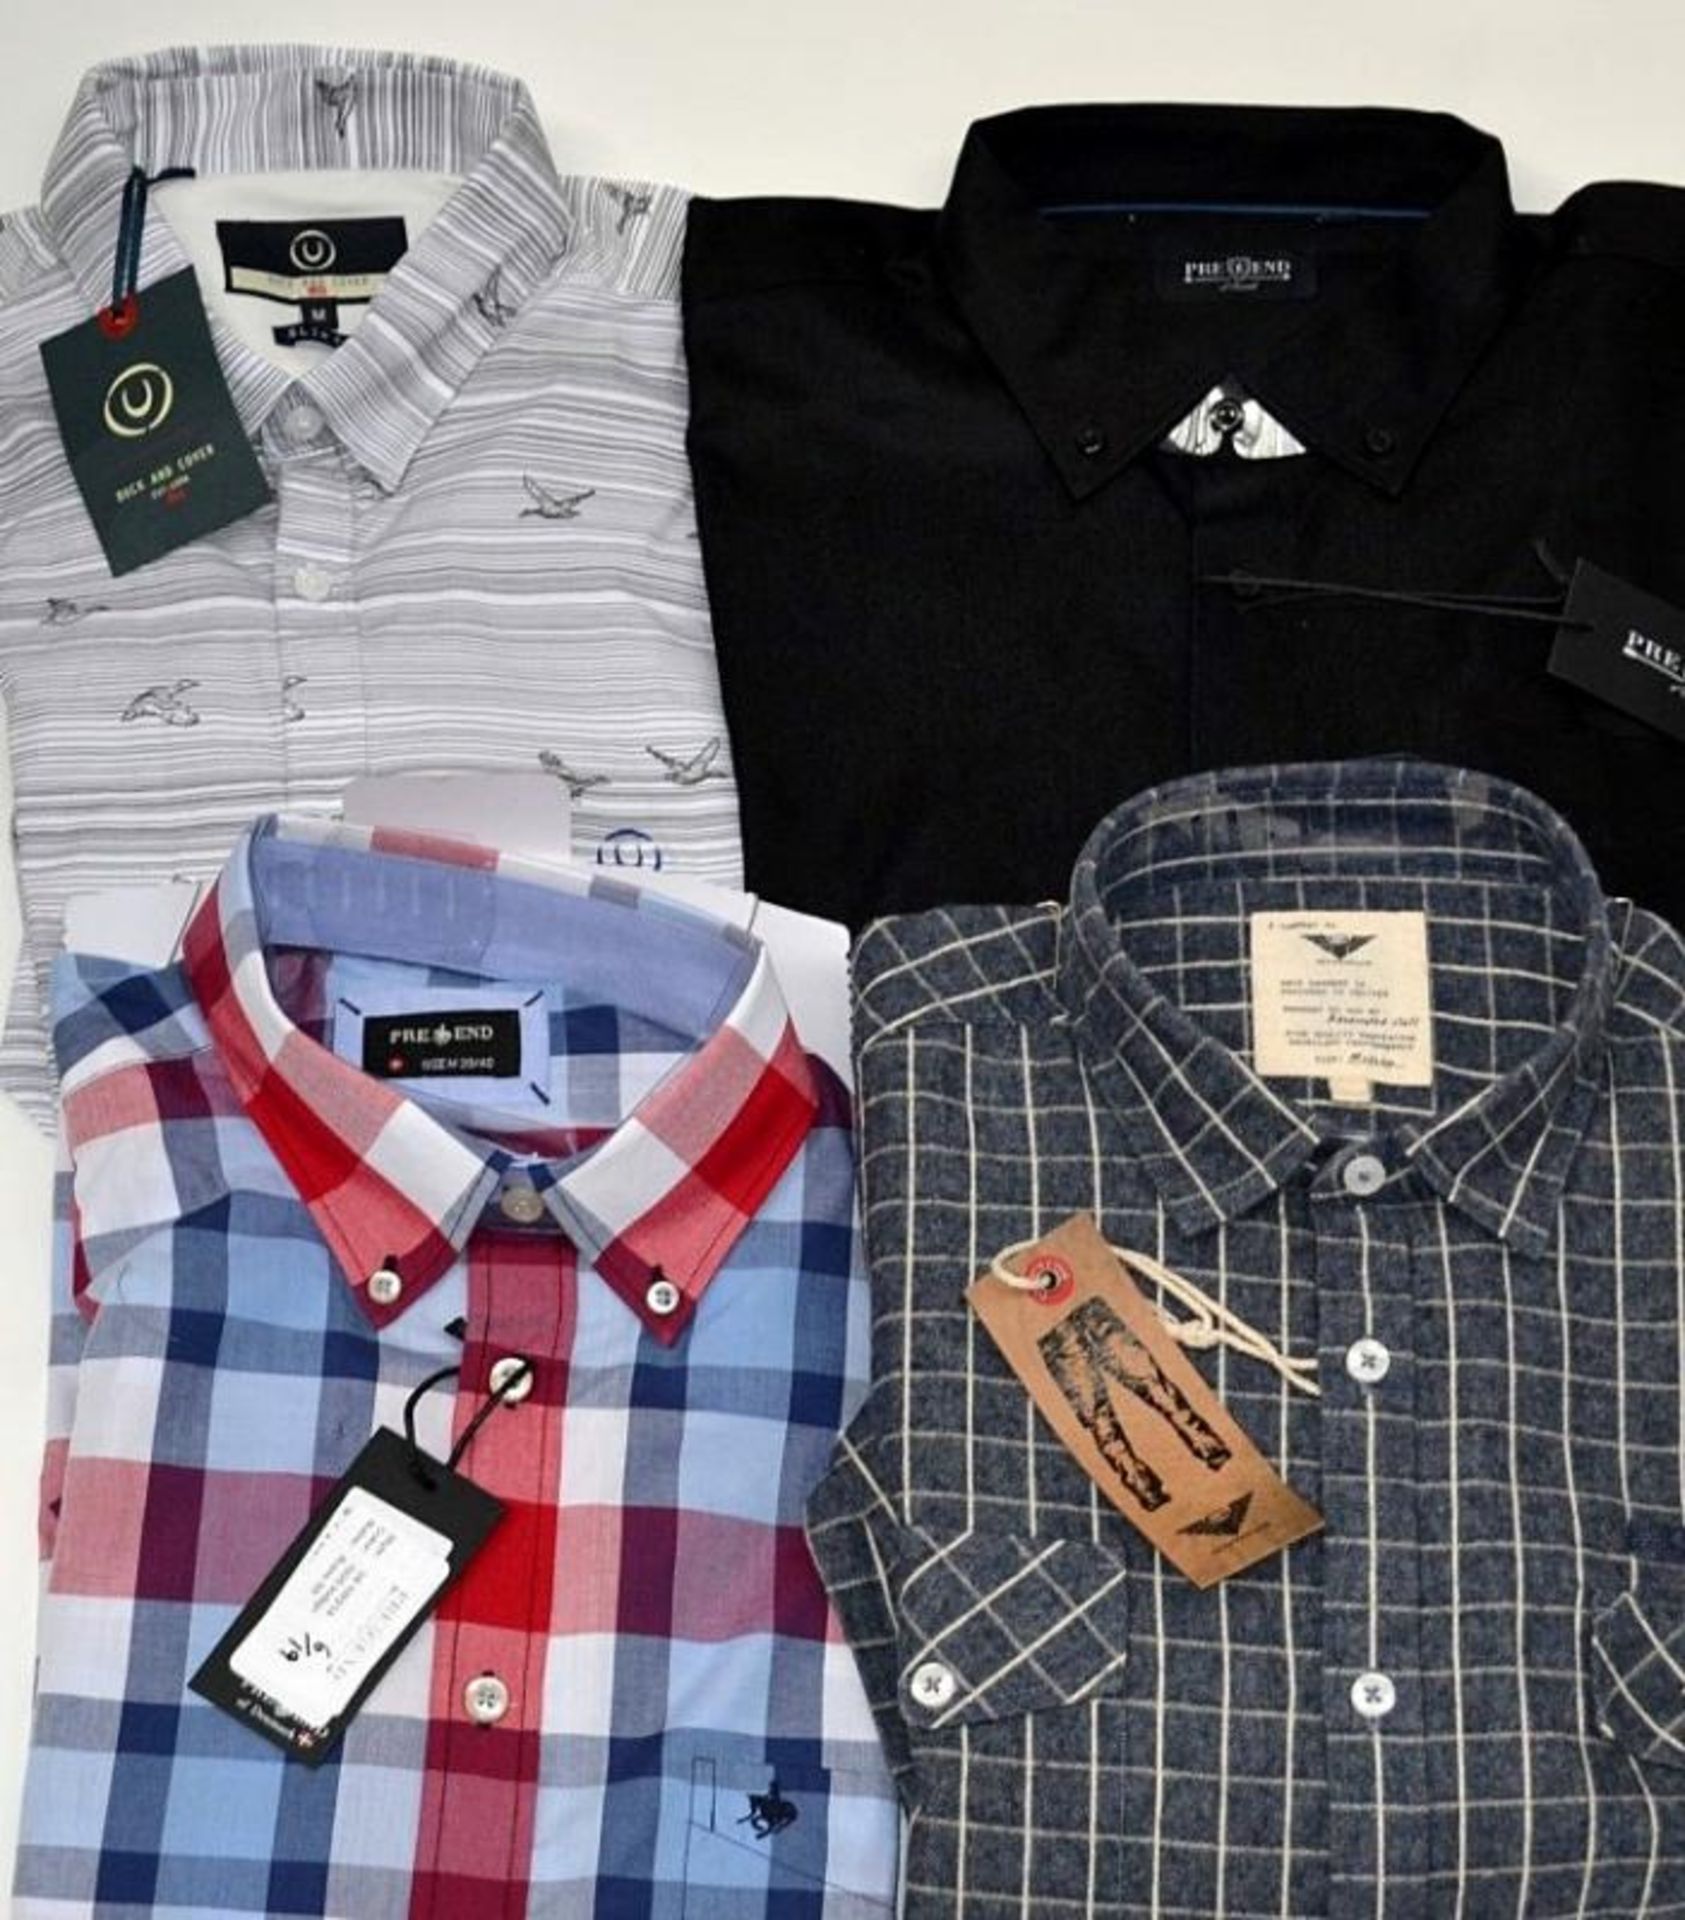 4 x Assorted Pre End Mens Shirts - Various Styles - Suitable For Evenings Out Or To Wear In The